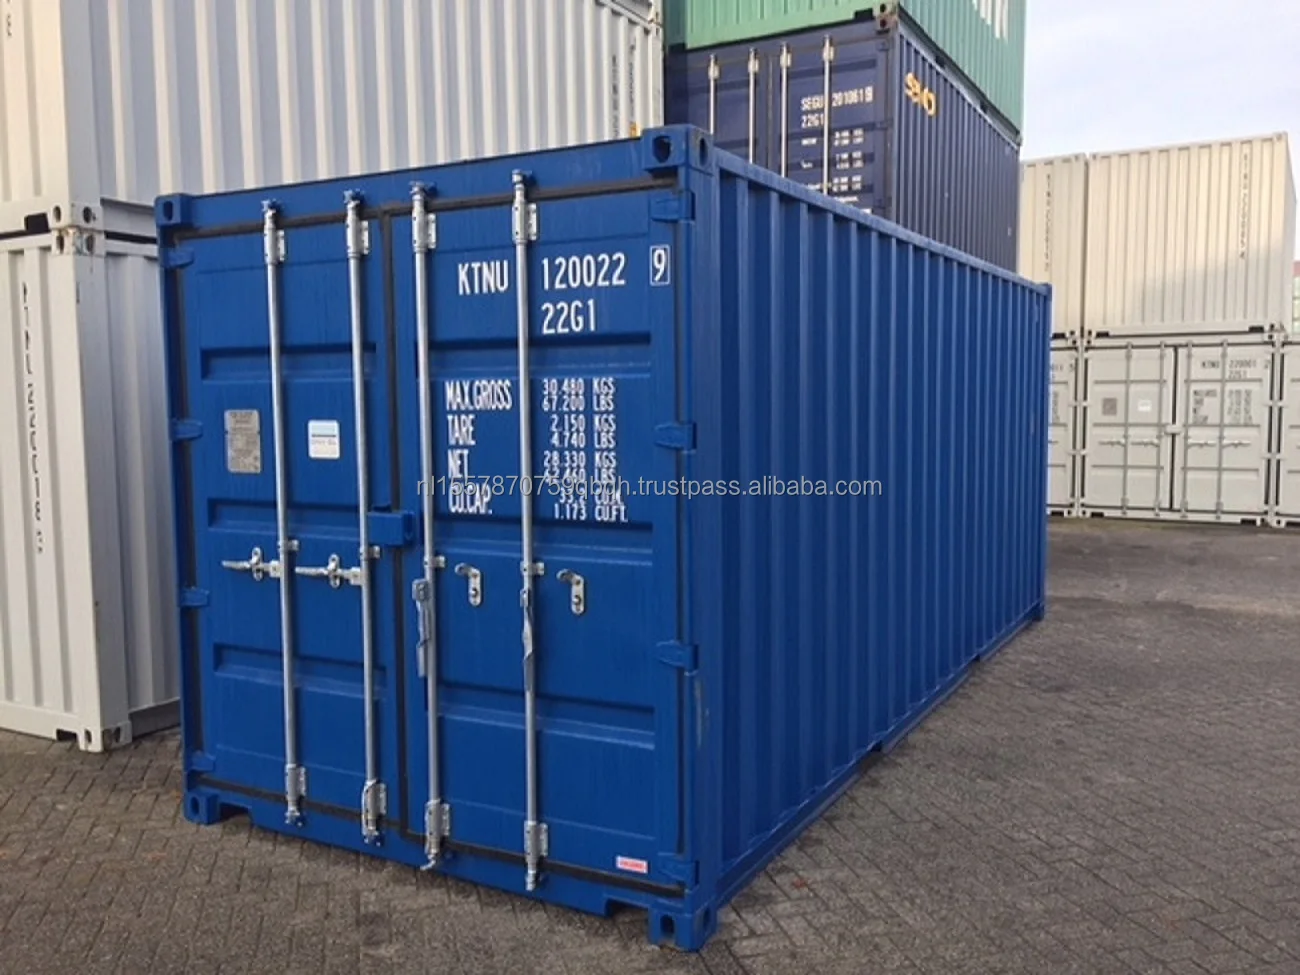 20ft 40ft Standard Used Cargo Shipping Containers CSC Certified 40ft Container Stainless Steel Shipping Containers Warranty Year